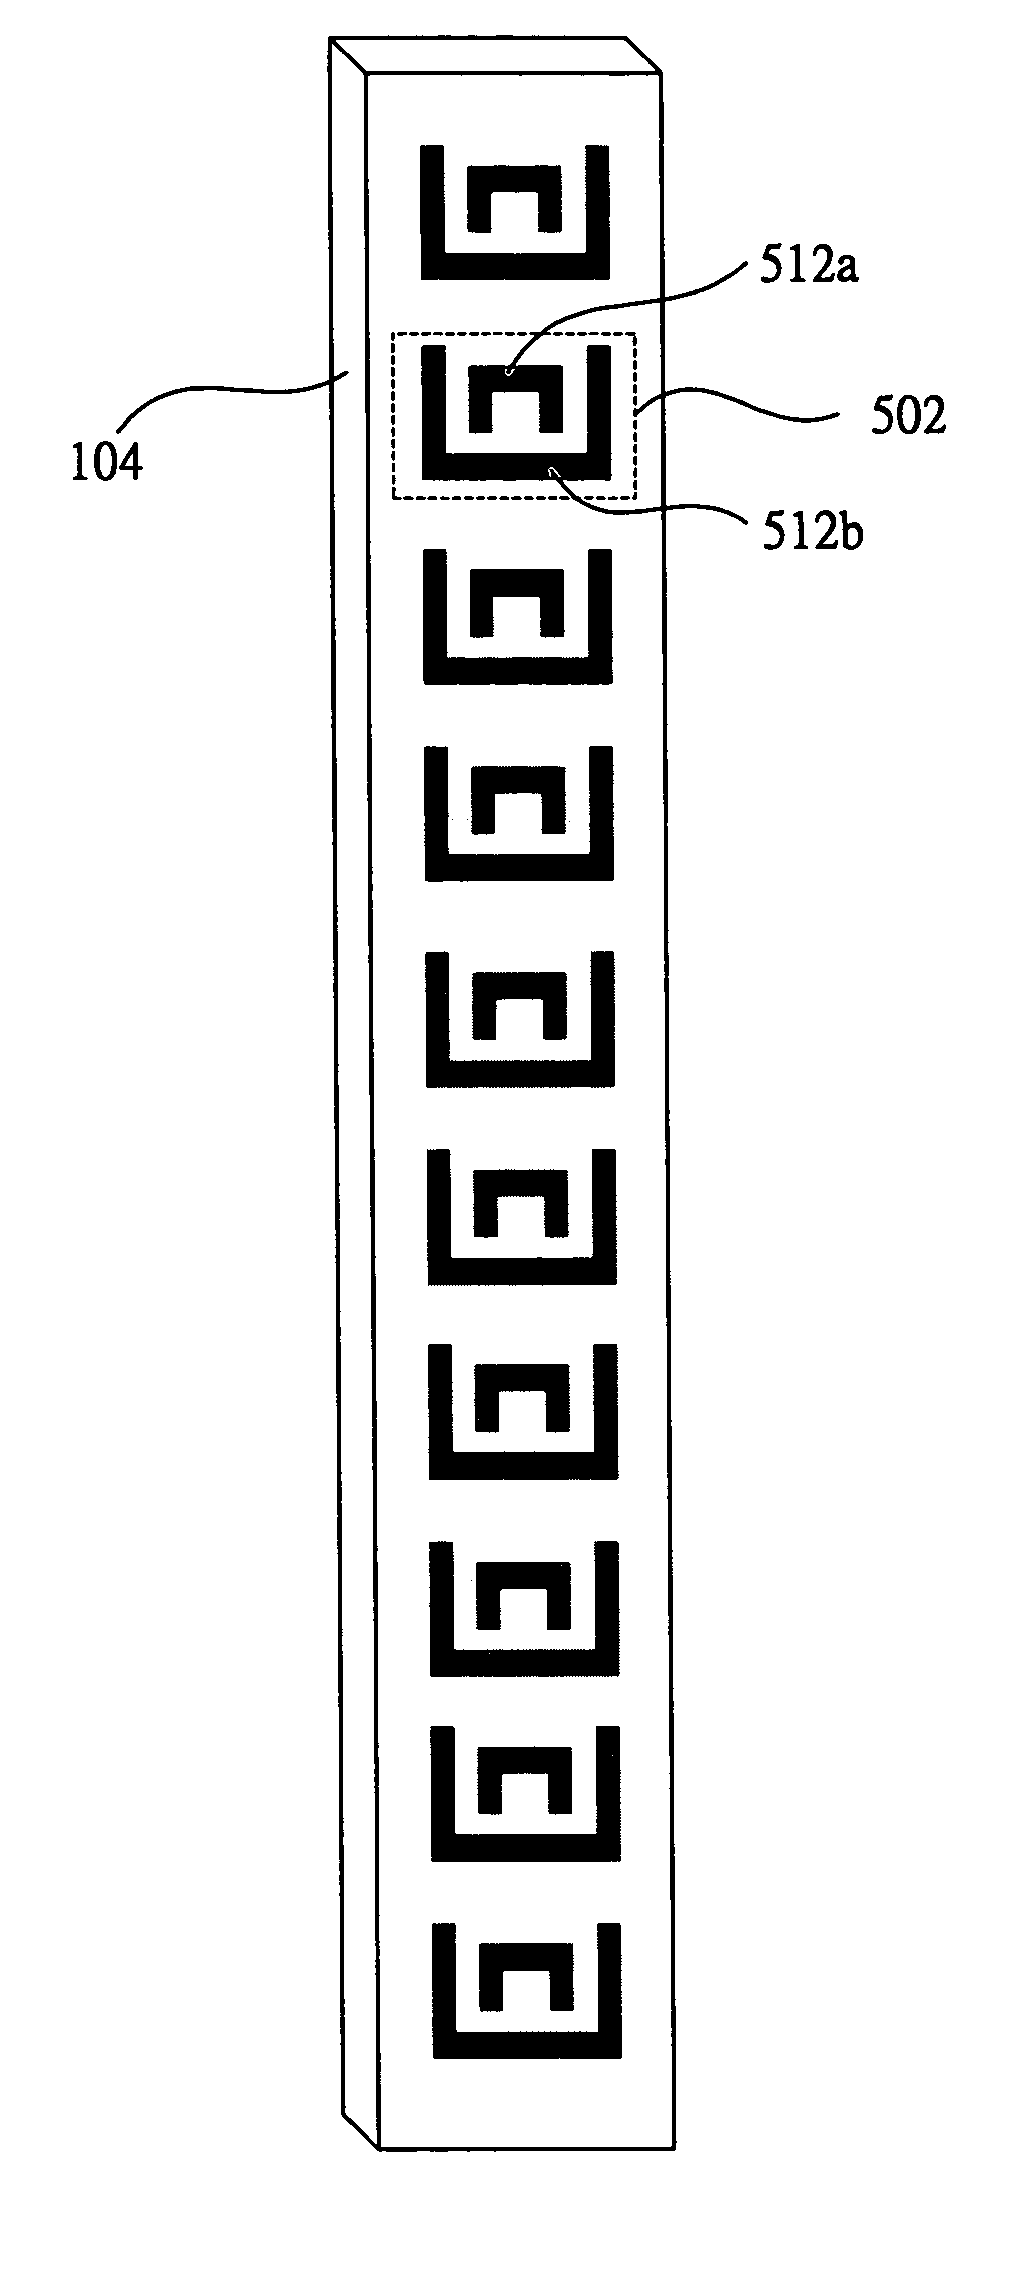 Method and apparatus for improving antenna radiation patterns